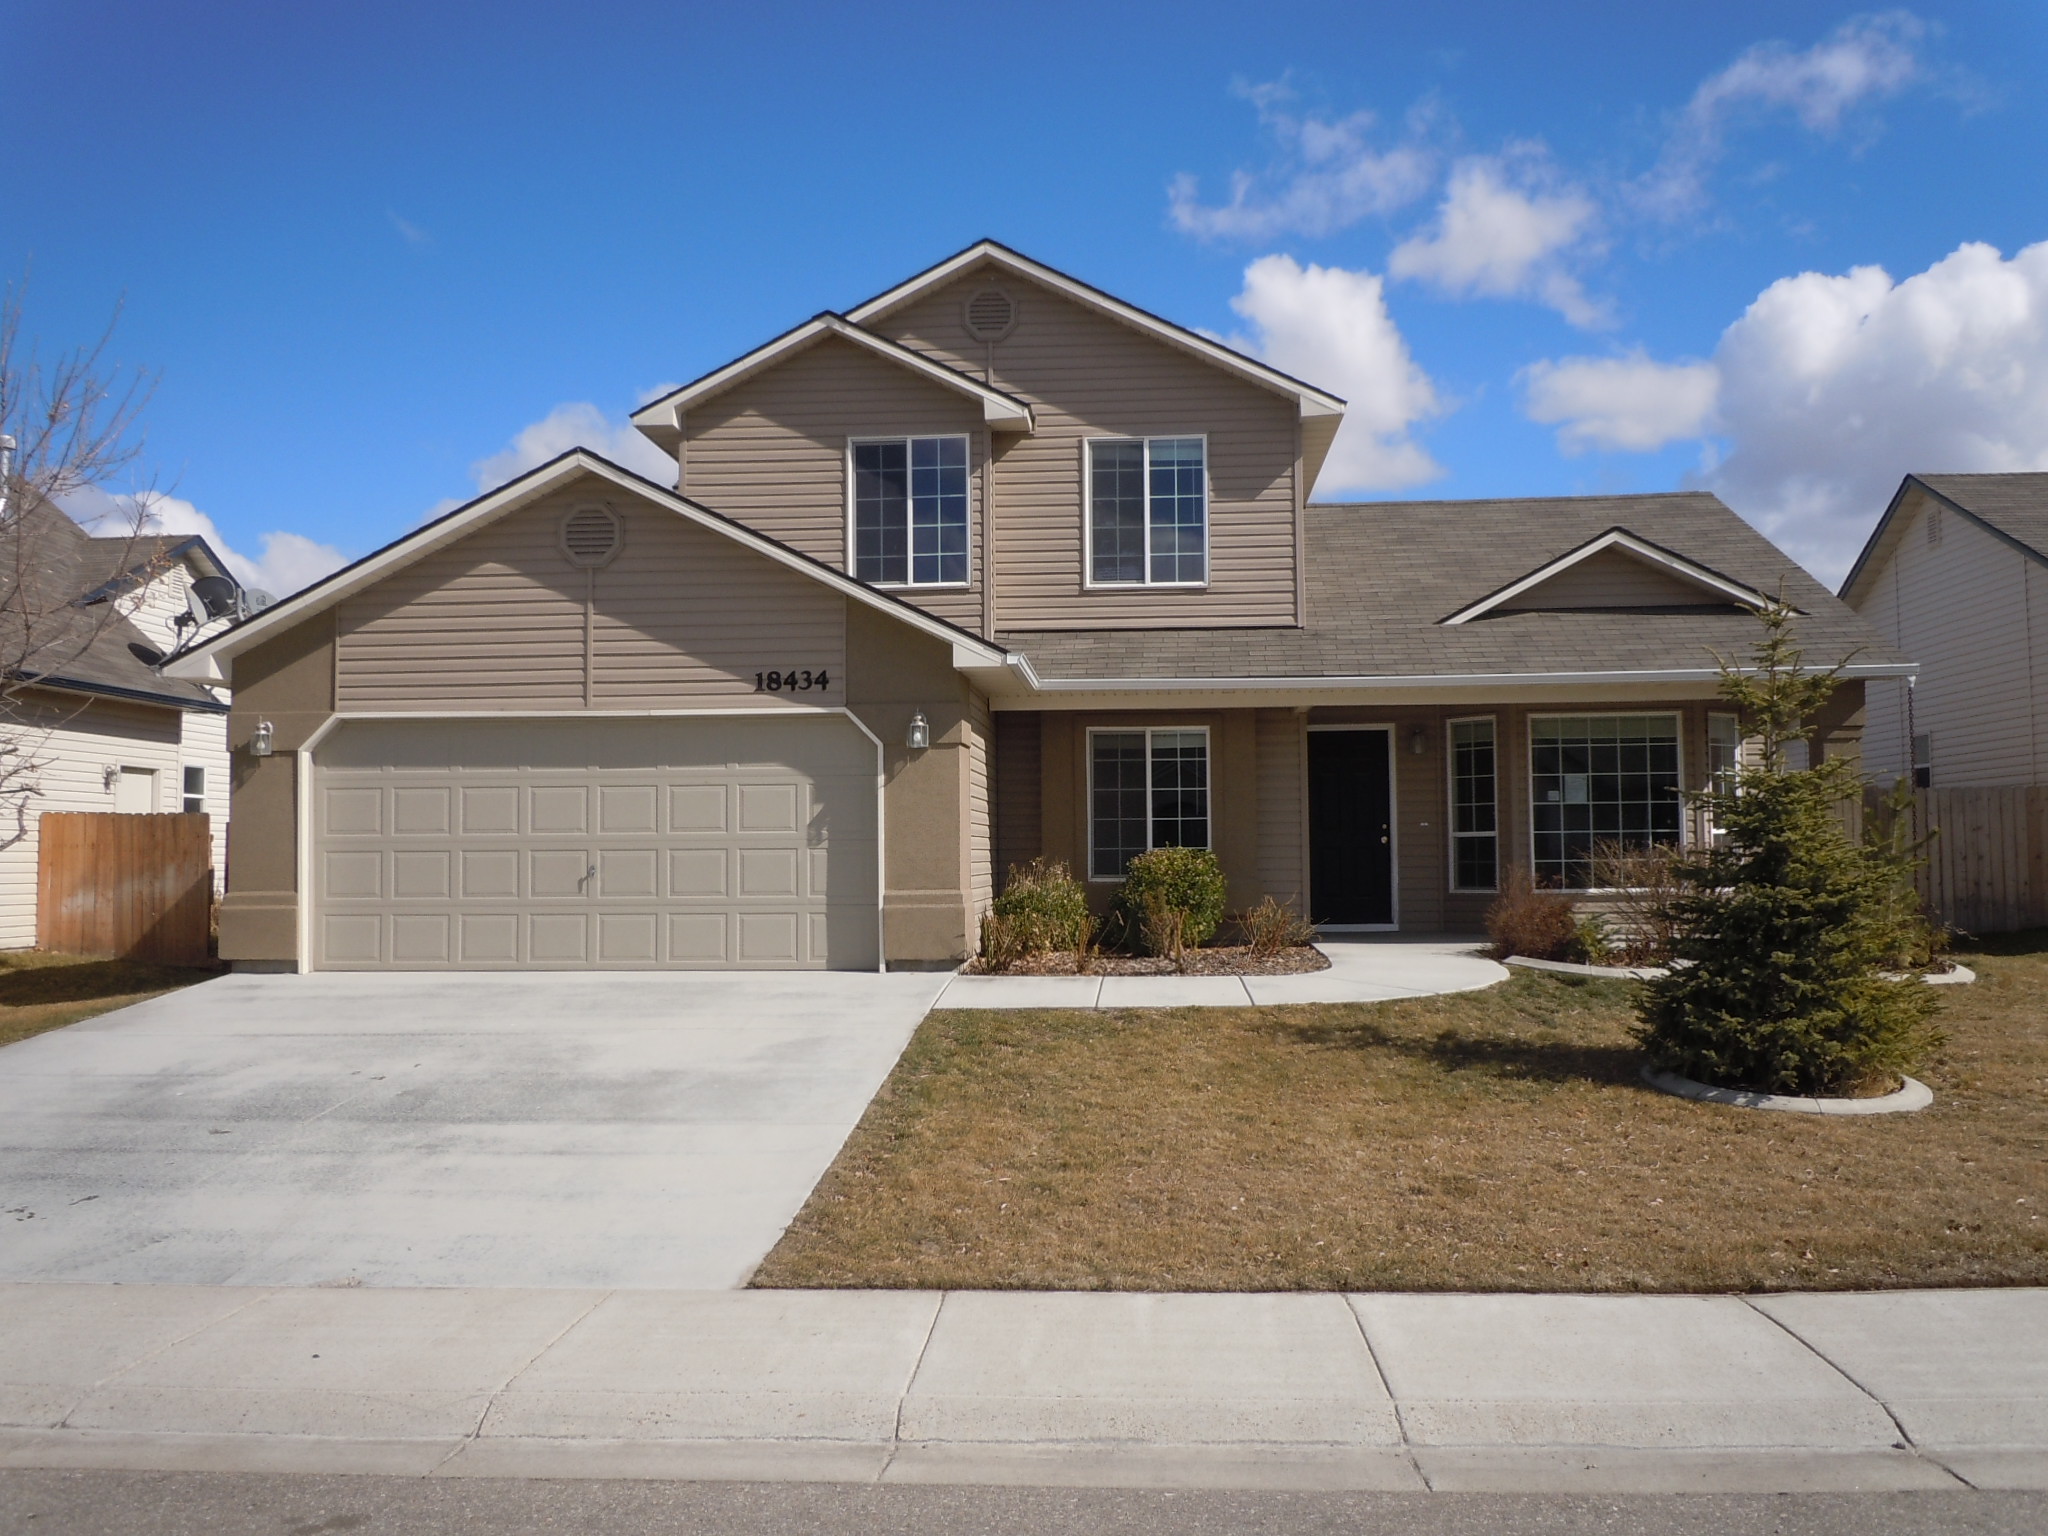 trustidaho-move-in-ready-hud-home-for-sale